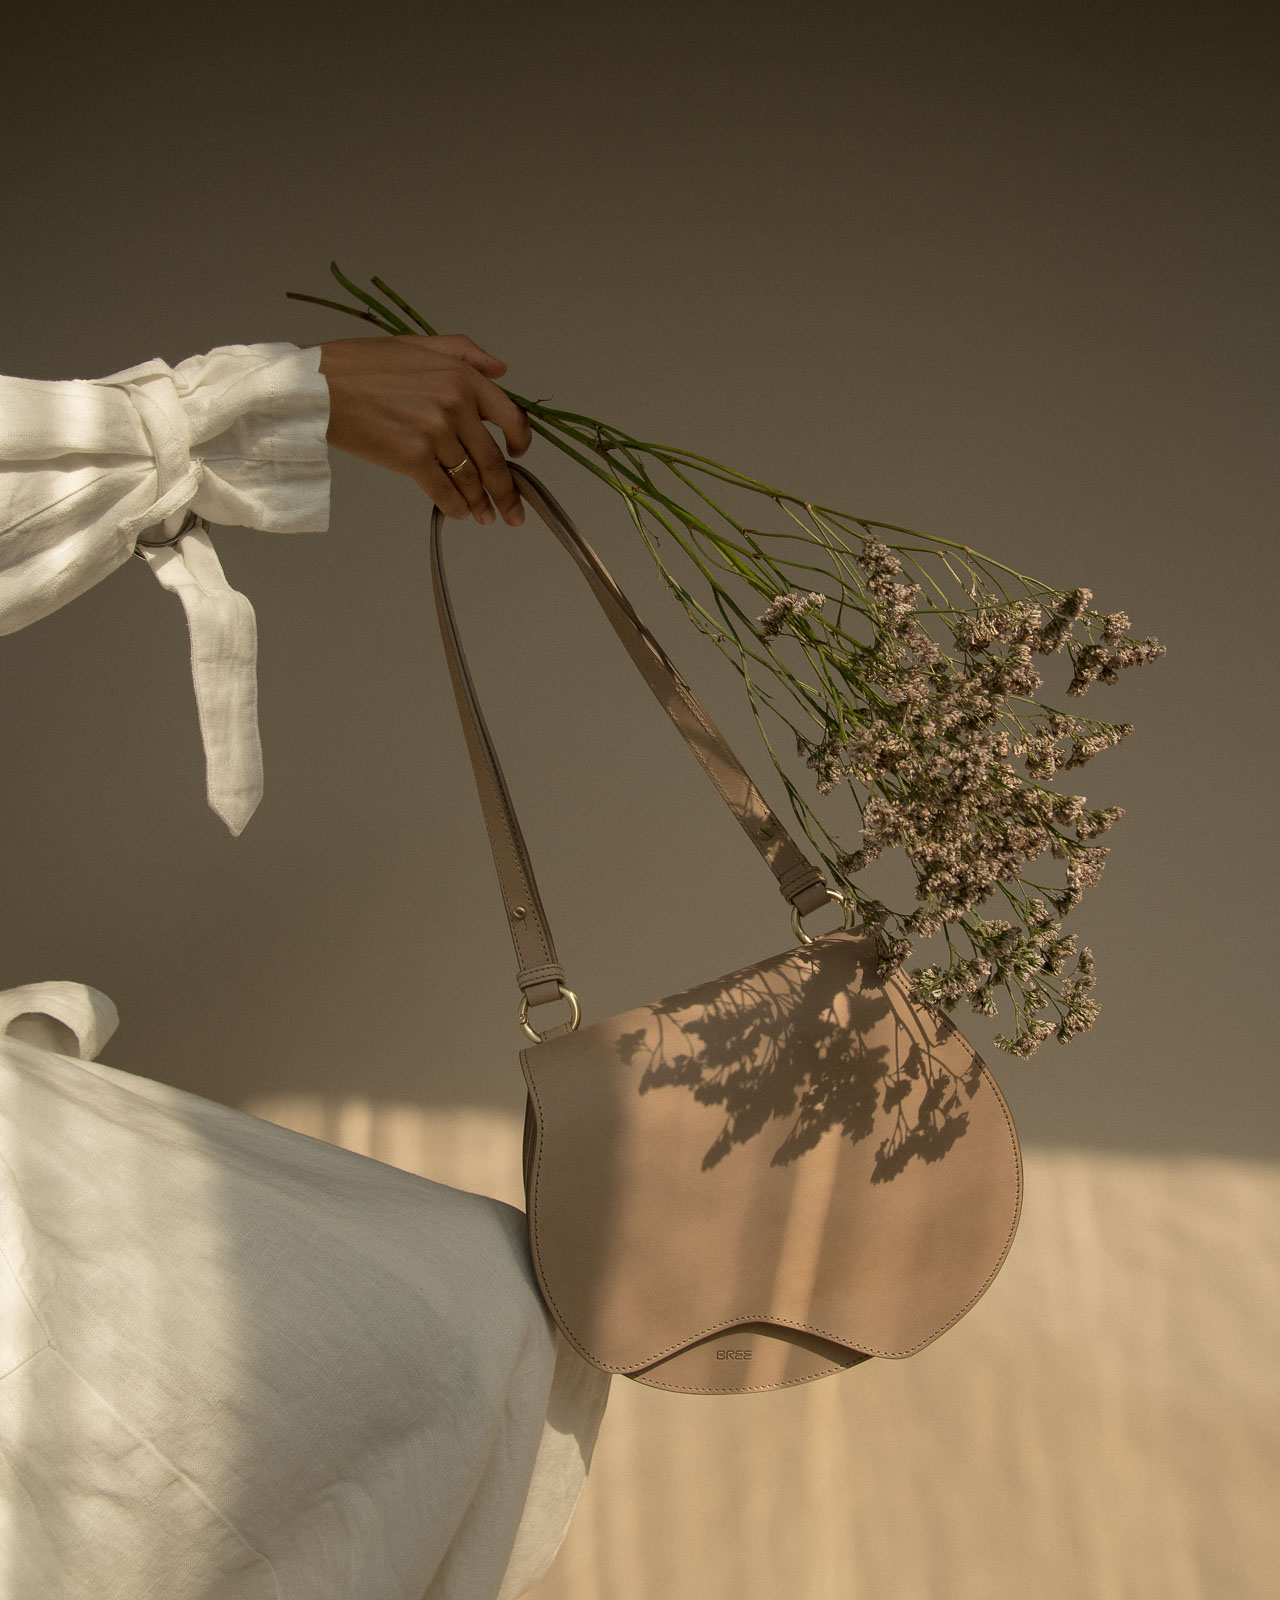 storm wears blanche copenhagen white linen coat with bree nature beauty bag in color humus shot by marius knieling